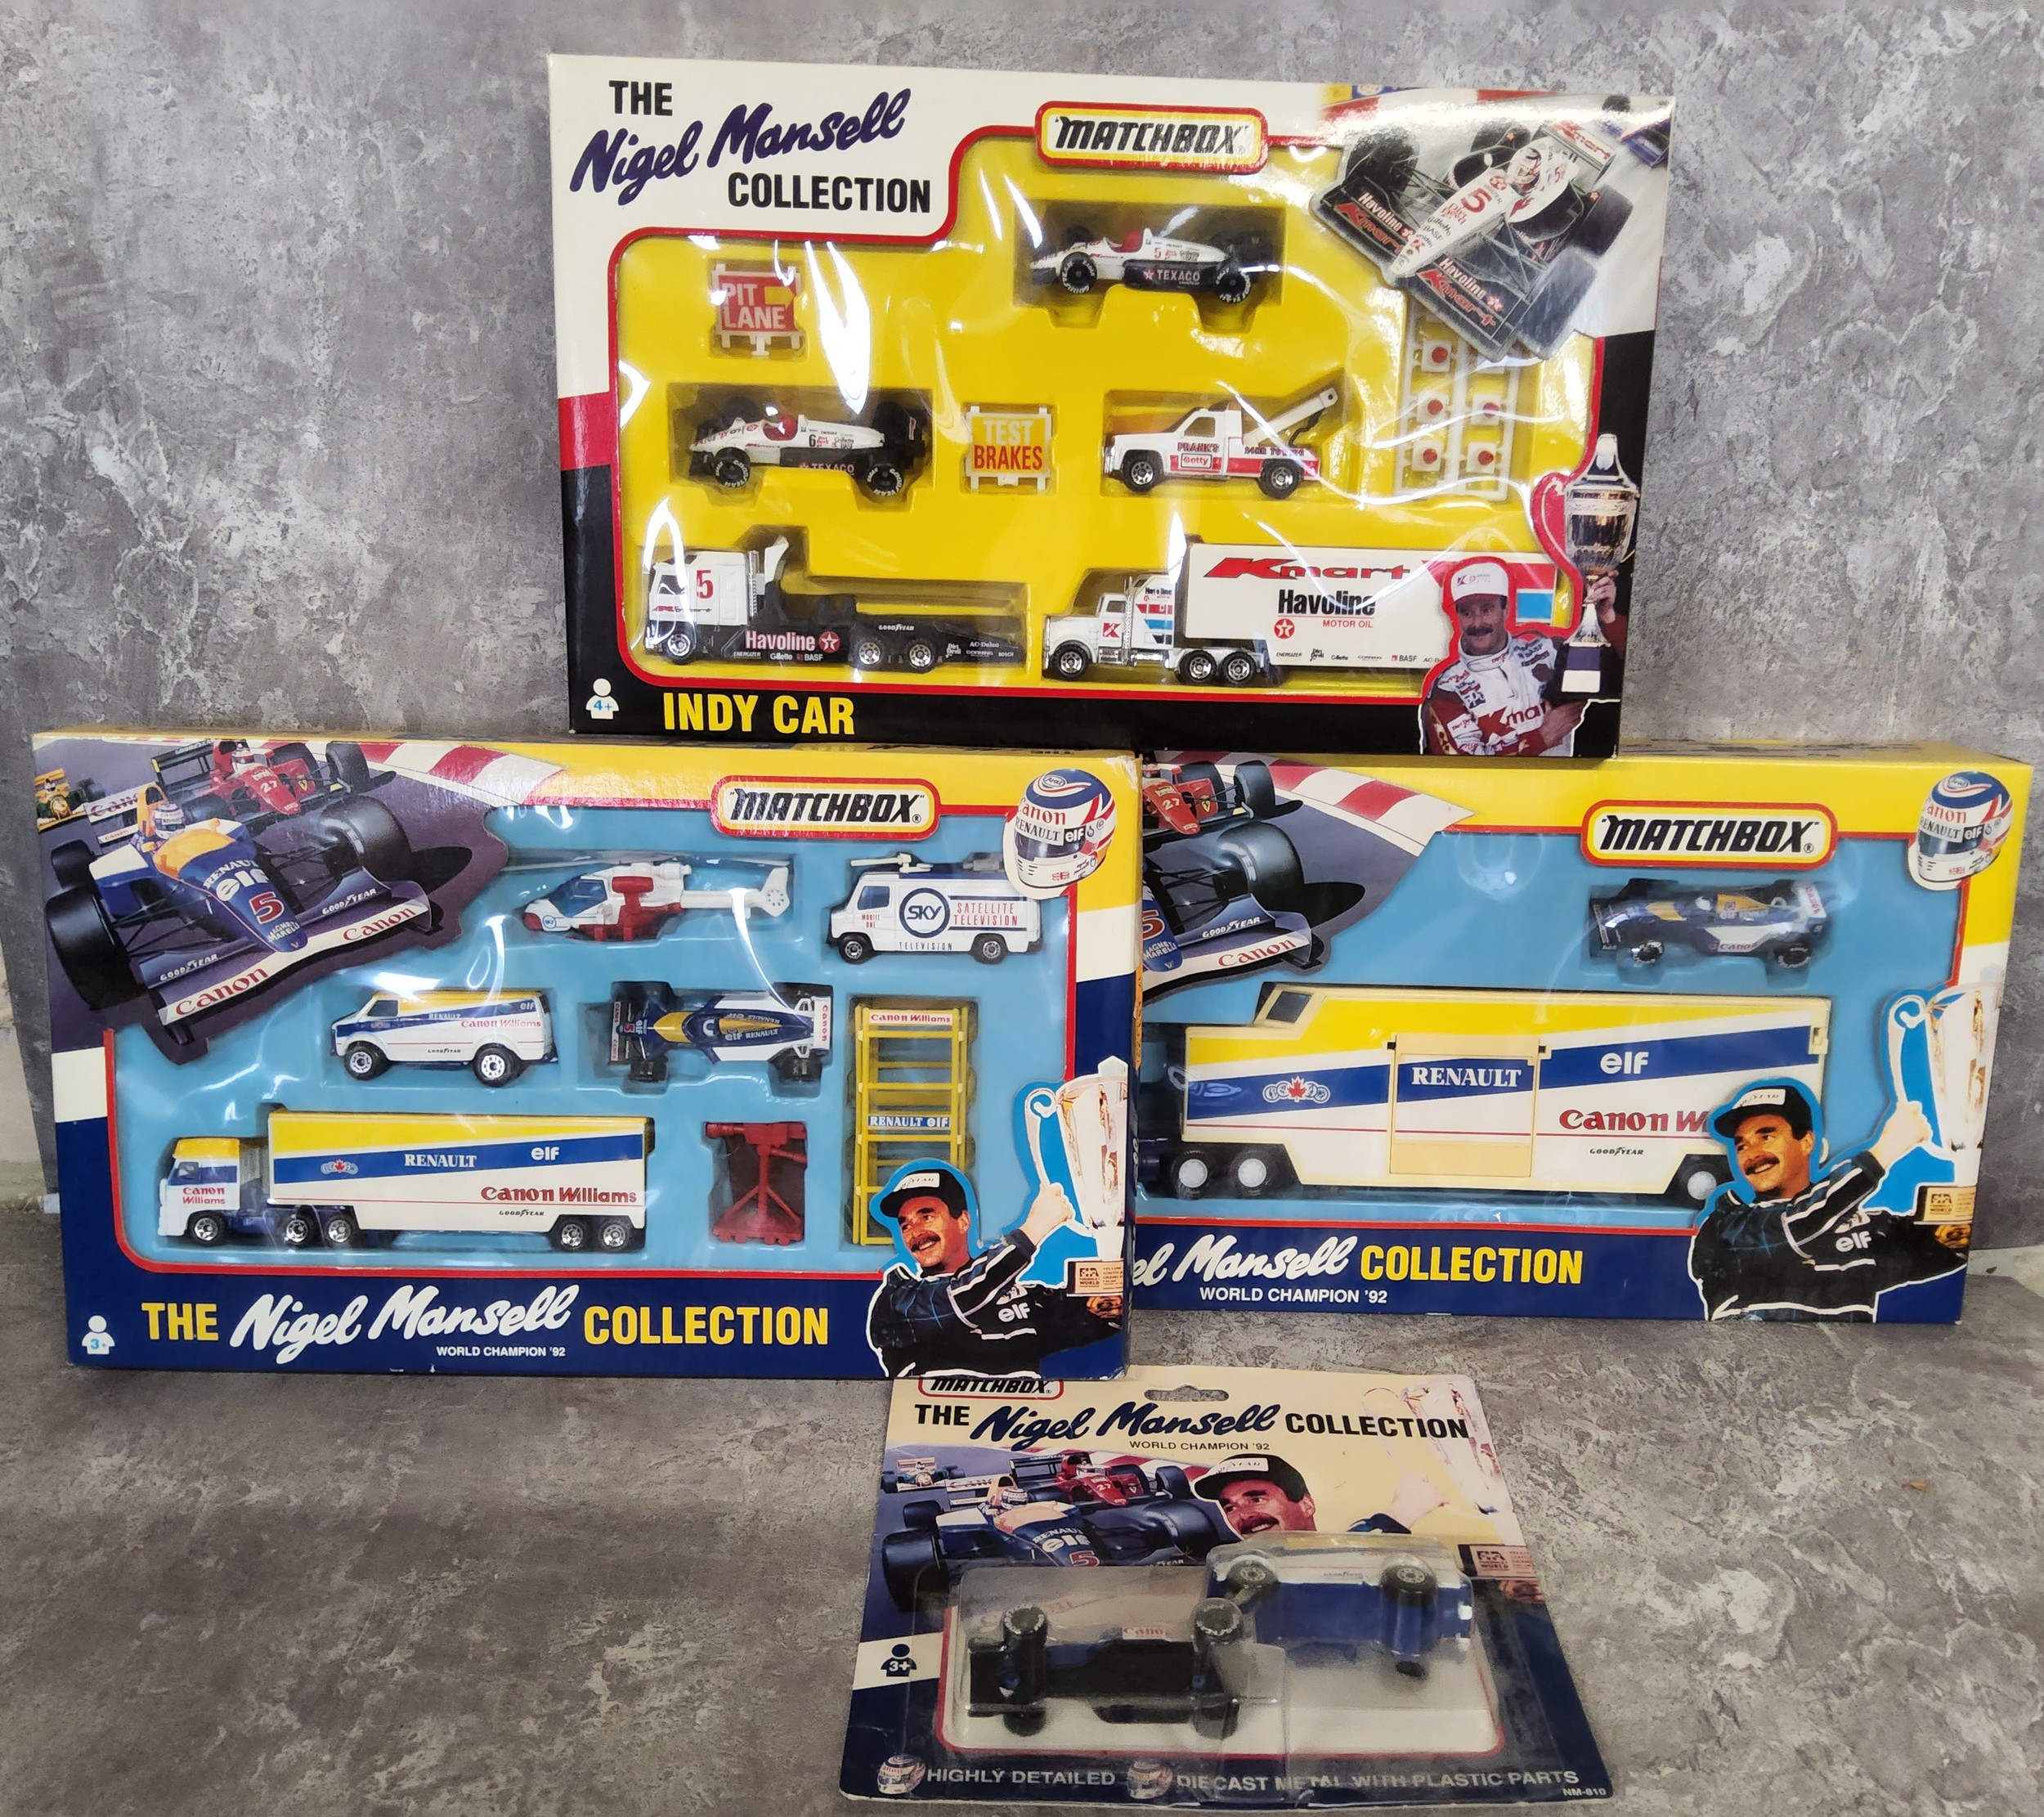 Matchbox "The Nigel Mansell Collection" - "World Champion 92" including NM-810 2-model blister